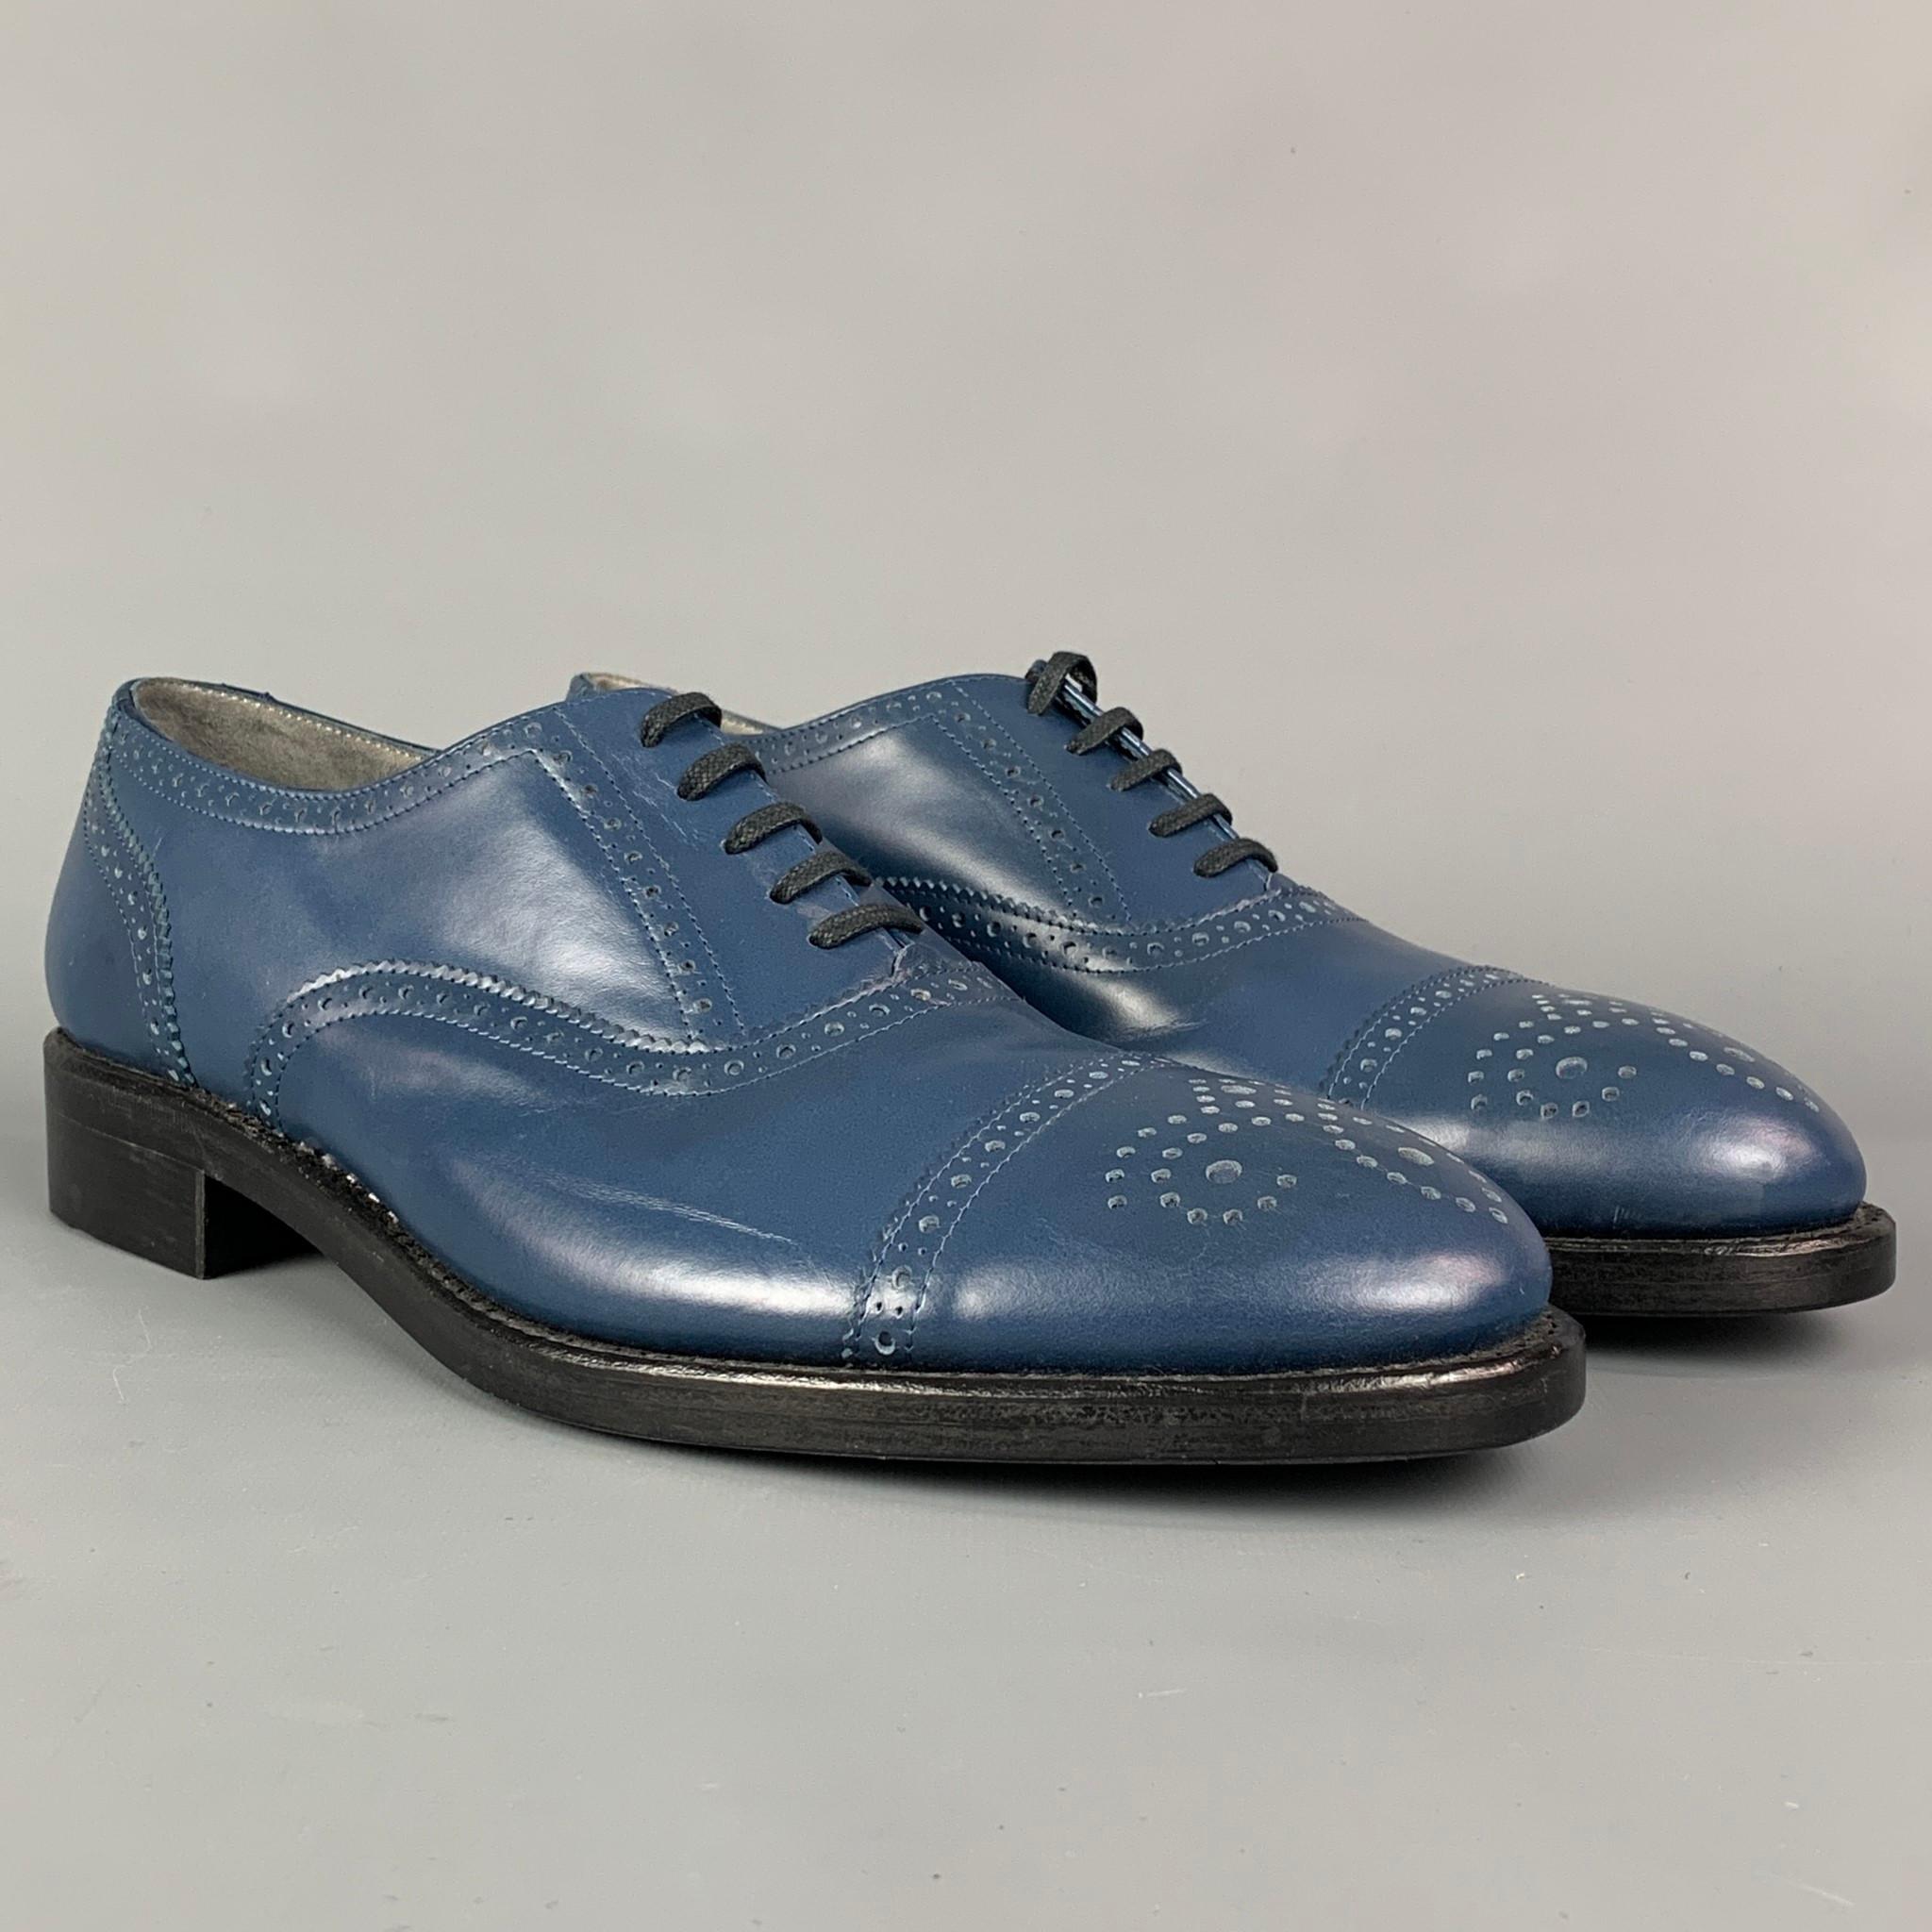 ROBERT CLERGERIE for J. FENESTRIER shoes comes in a blue perforated featuring a cap toe, leather sole, and a lace up closure. Made in France.

Very Good Pre-Owned Condition.
Marked: 42.5 E 01 0951 24

Outsole: 12 in. x 4 in. 